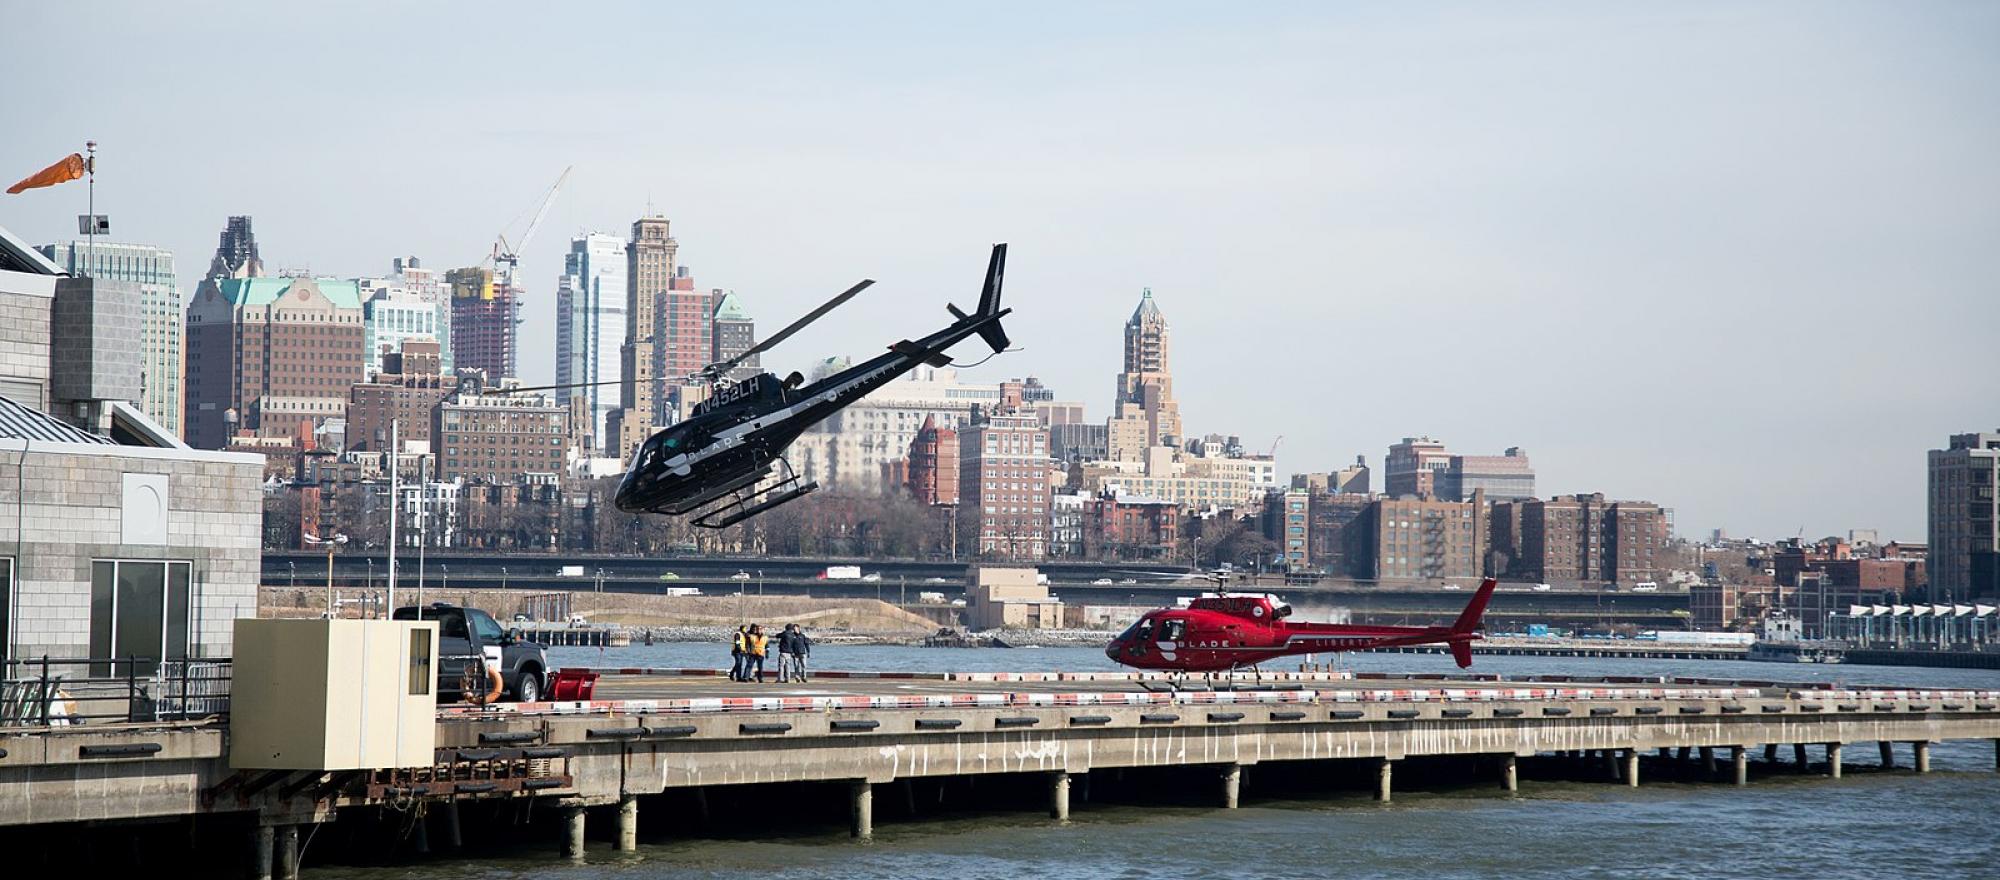 Blade helicopters at heliport in NYC, one coming in for landing